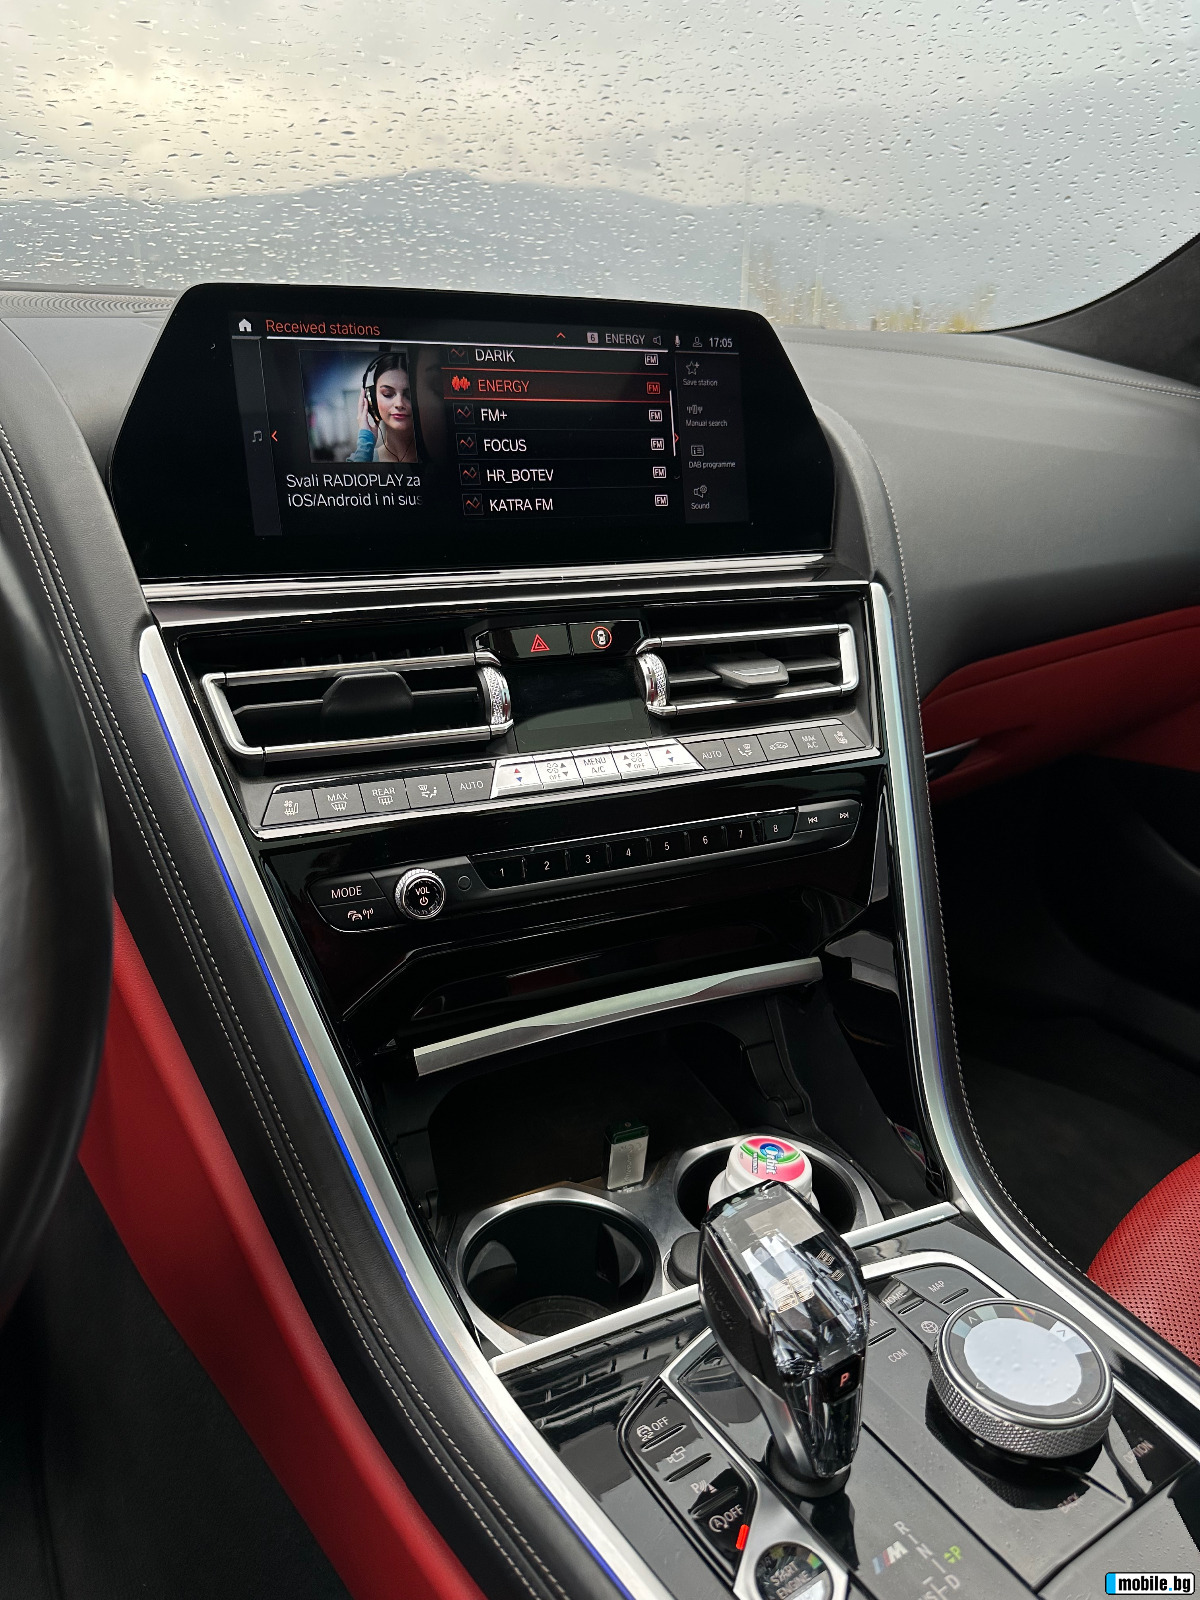 BMW 850 i xDrive BOWERS&WILKINS/ LASER / PANORAMA/ Head up | Mobile.bg   8